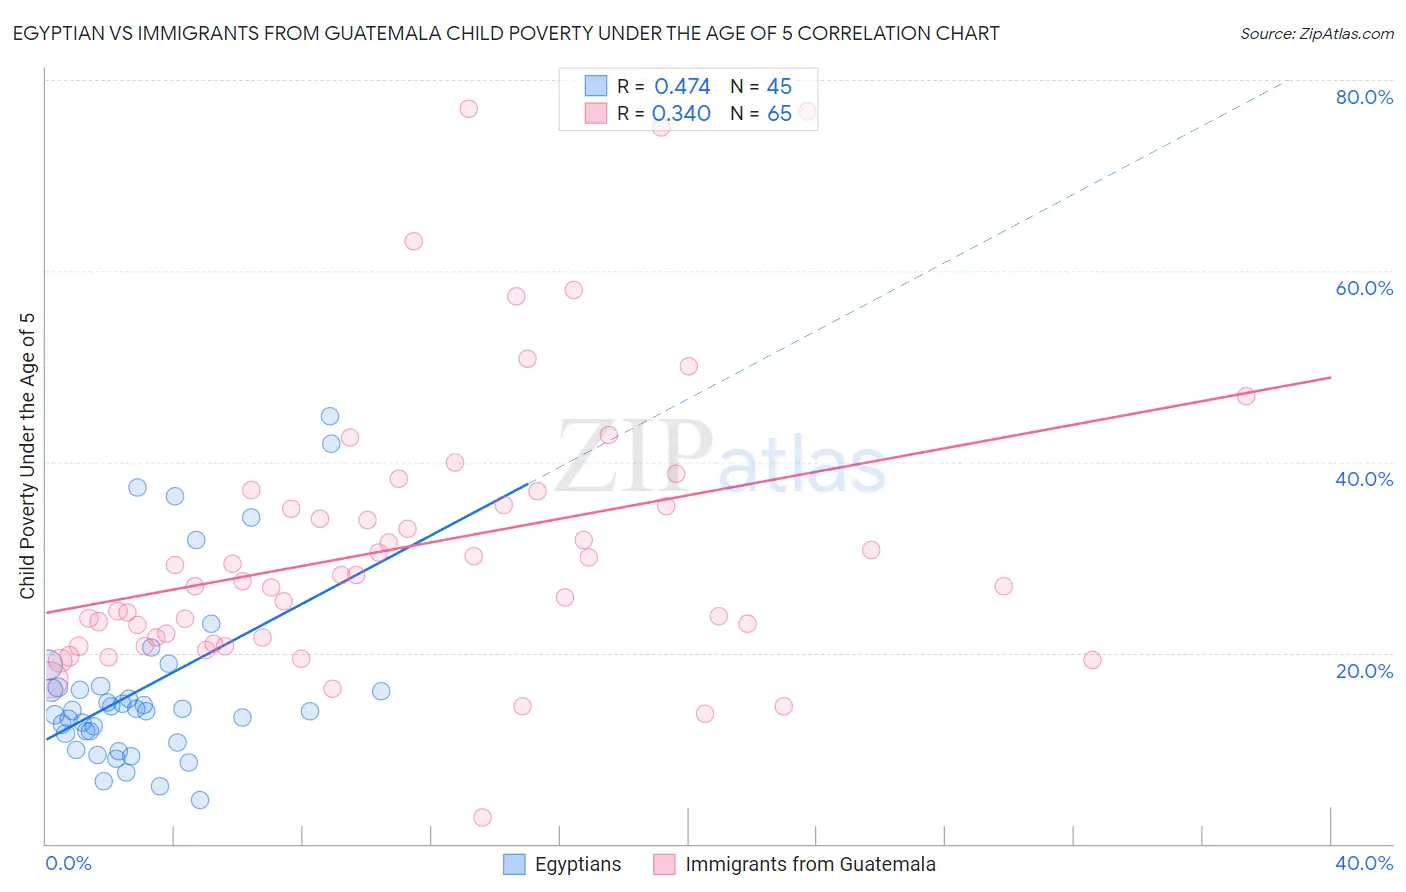 Egyptian vs Immigrants from Guatemala Child Poverty Under the Age of 5